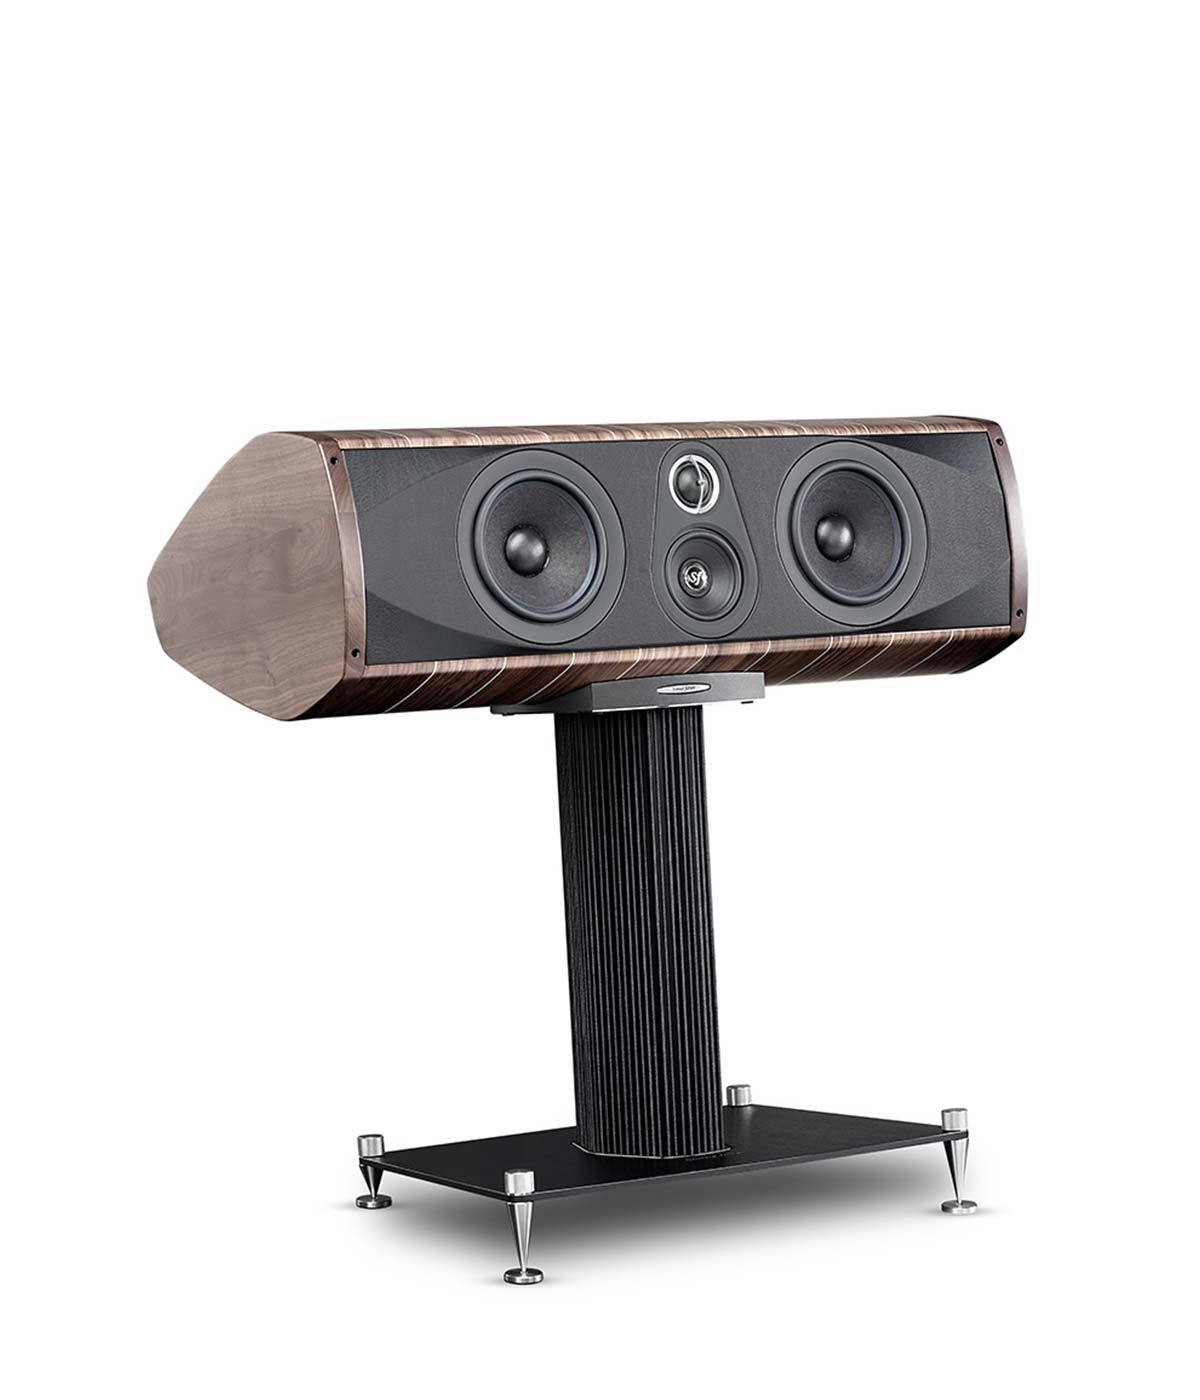 <span style="font-weight: bold;">Sonus faber</span><br>